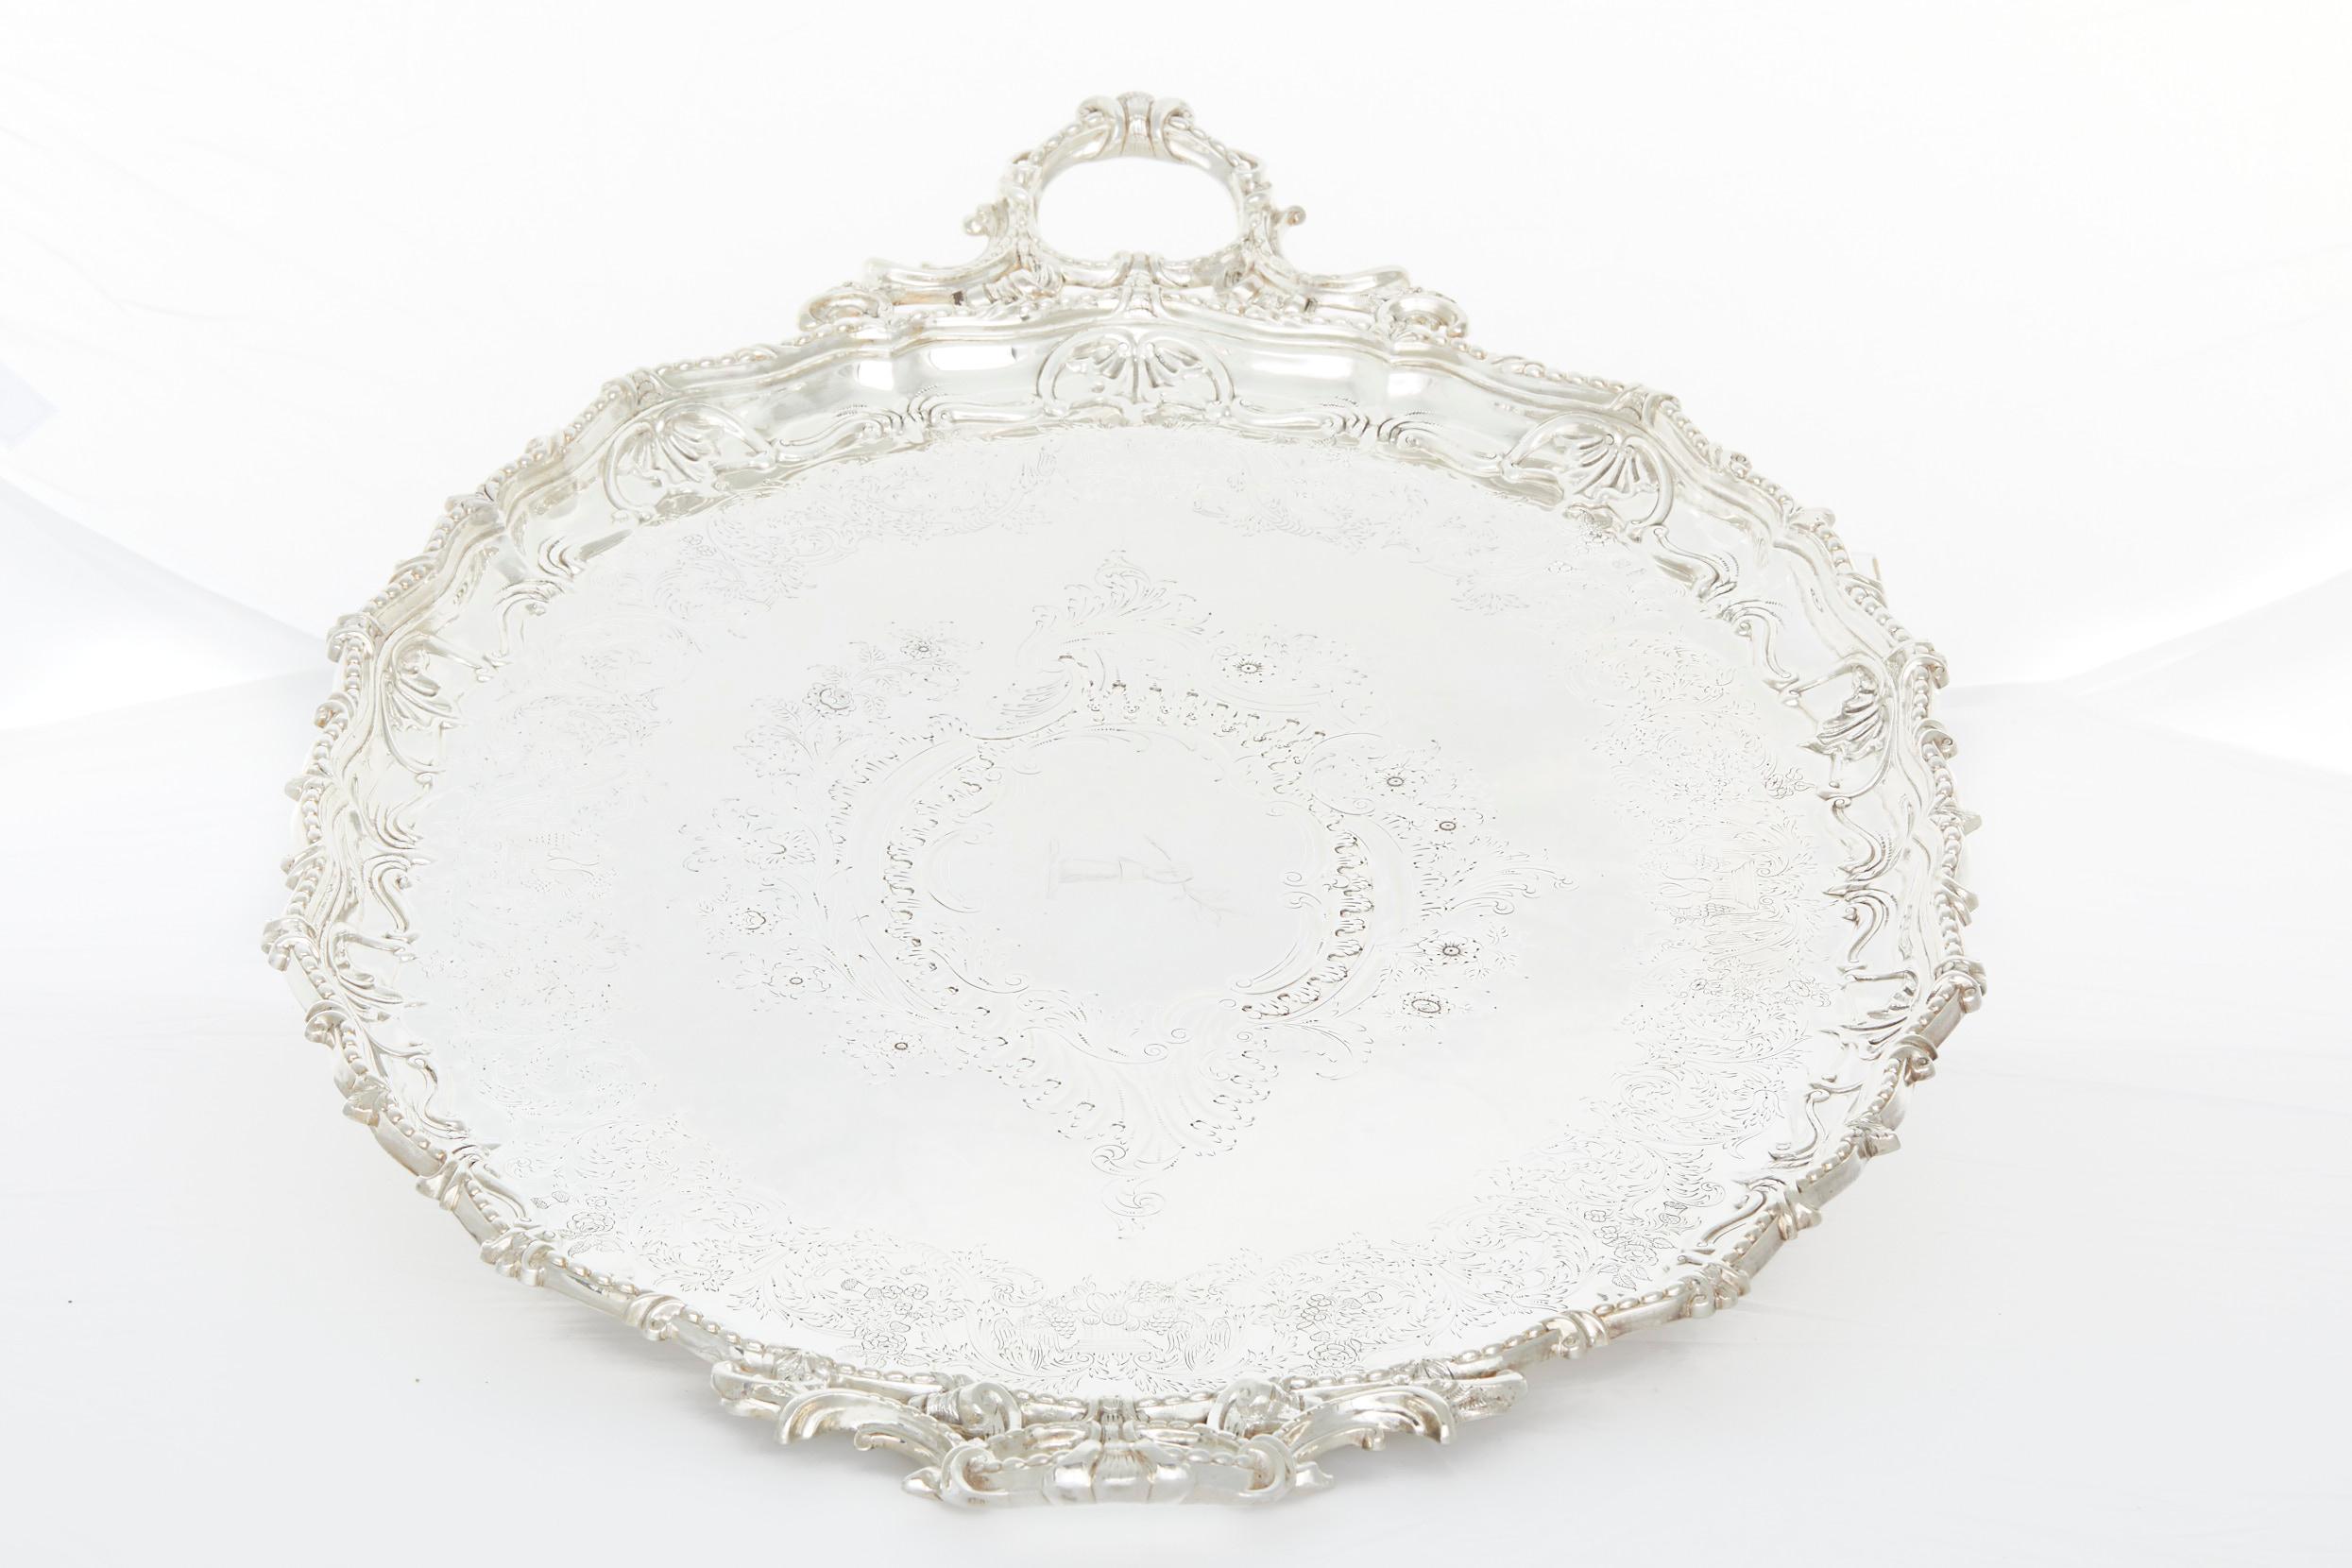 Large and heavy, Edwardian, Silver plated barware / tableware serving Tray . The tray features flat chased interior and exterior floral , scroll decoration to the body with a shaped shell and gadroon border, and an engraved crest and motto to the